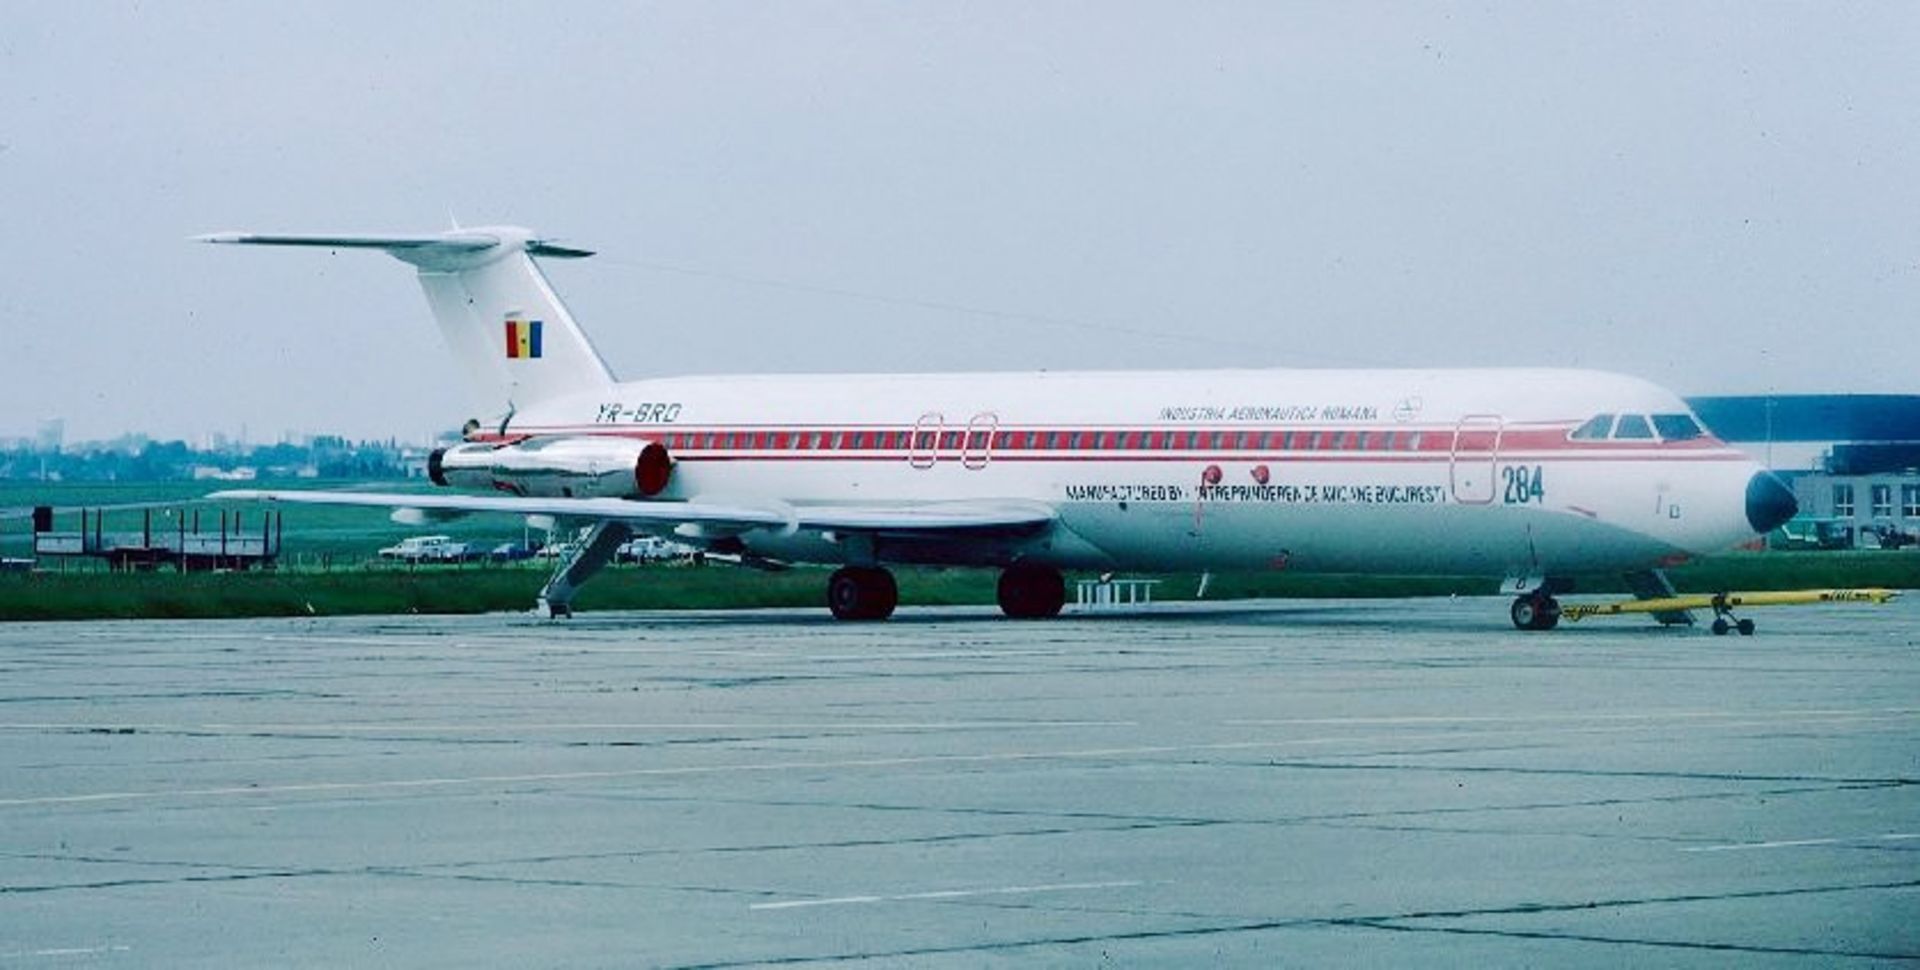 "Negrești" presidential plane, for the official flights of President Ion Iliescu, 1989 - Image 13 of 15